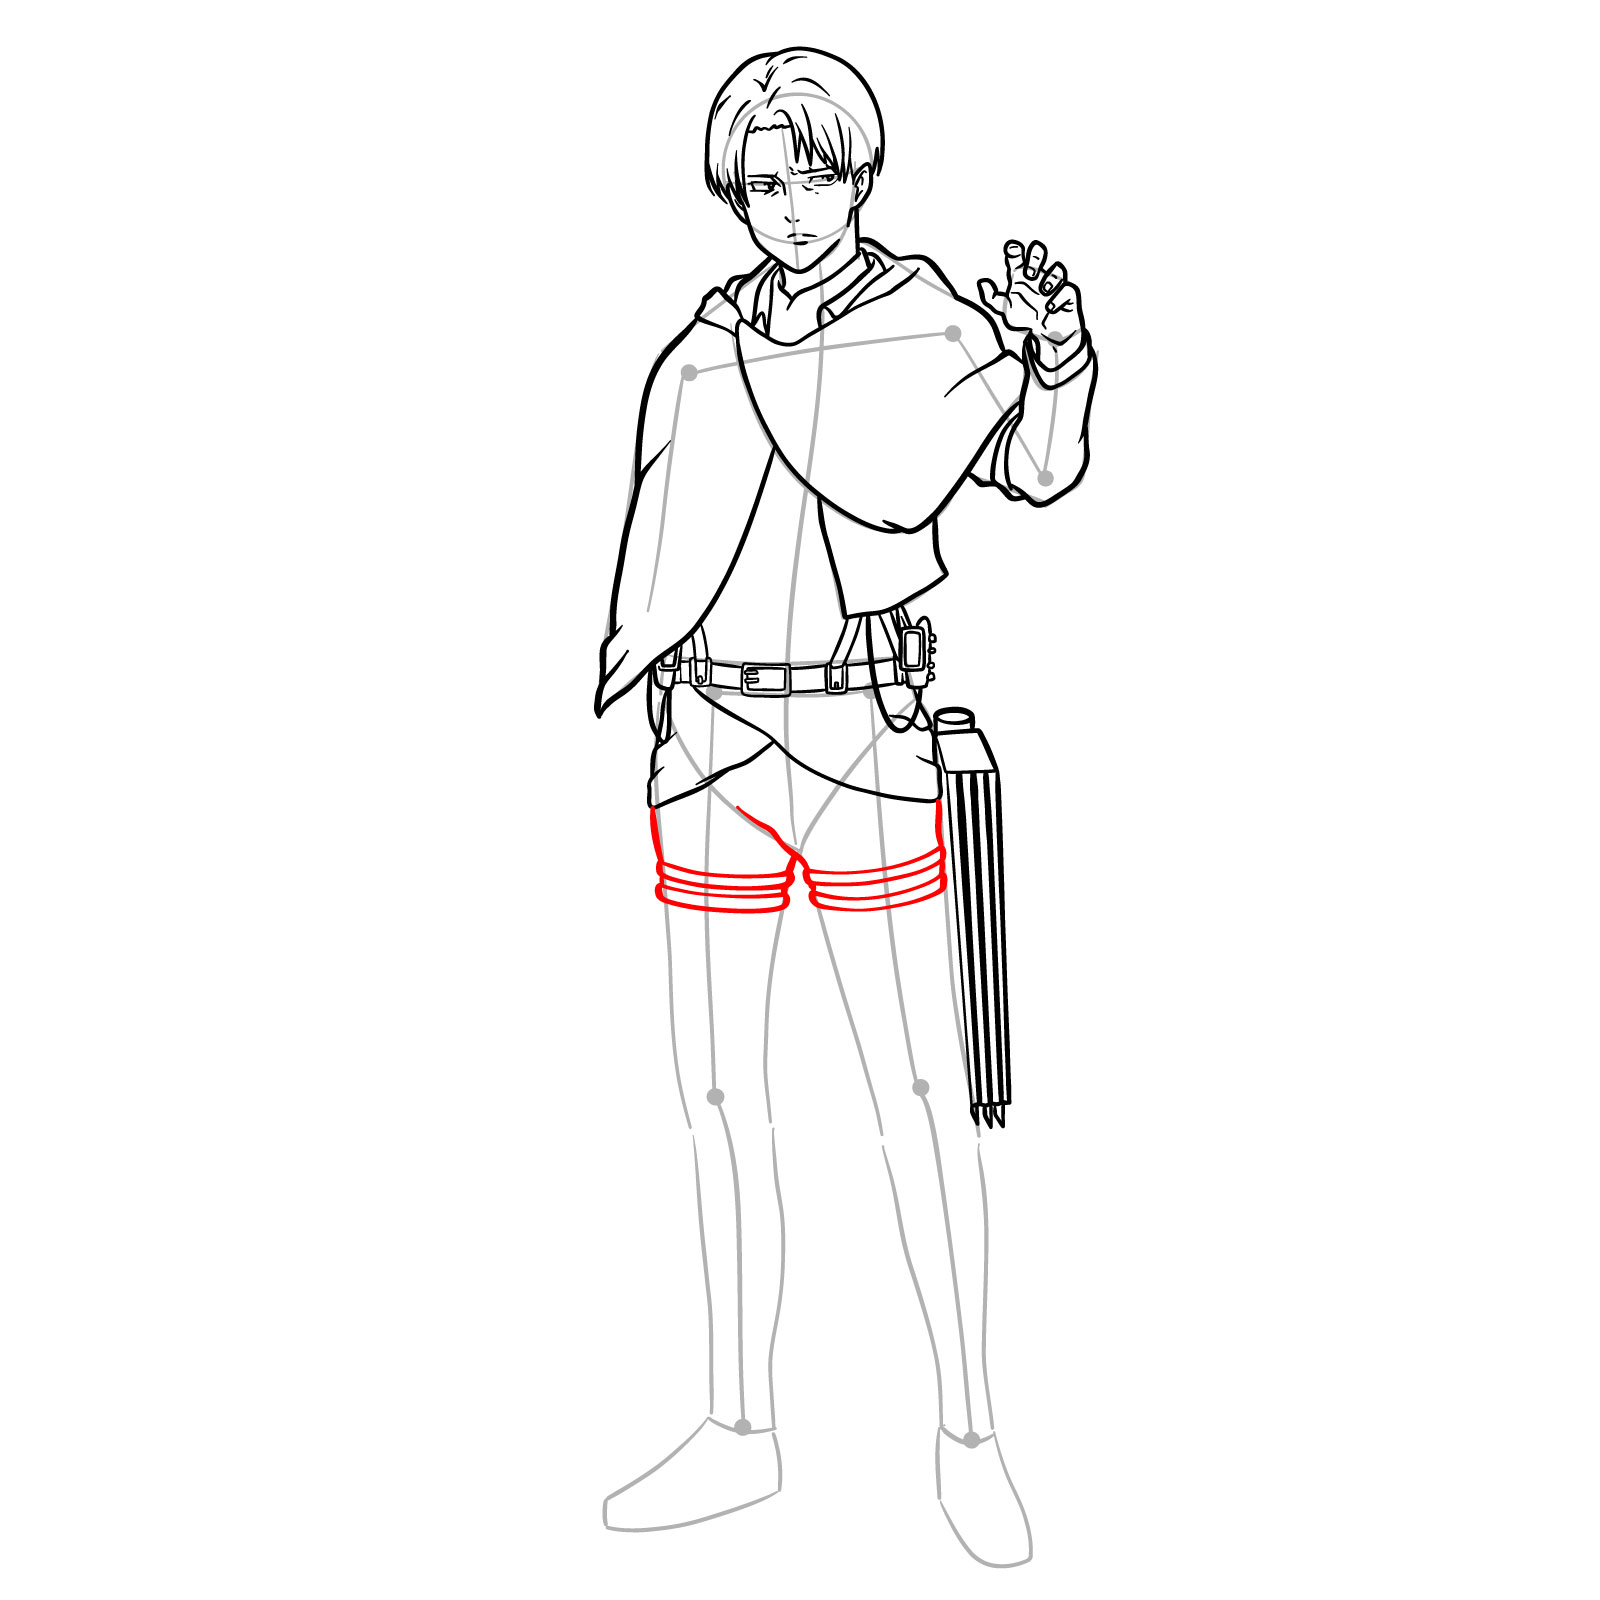 Step-by-step guide on drawing Captain Levi's legs and left ODM gear for a full body portrait - step 20